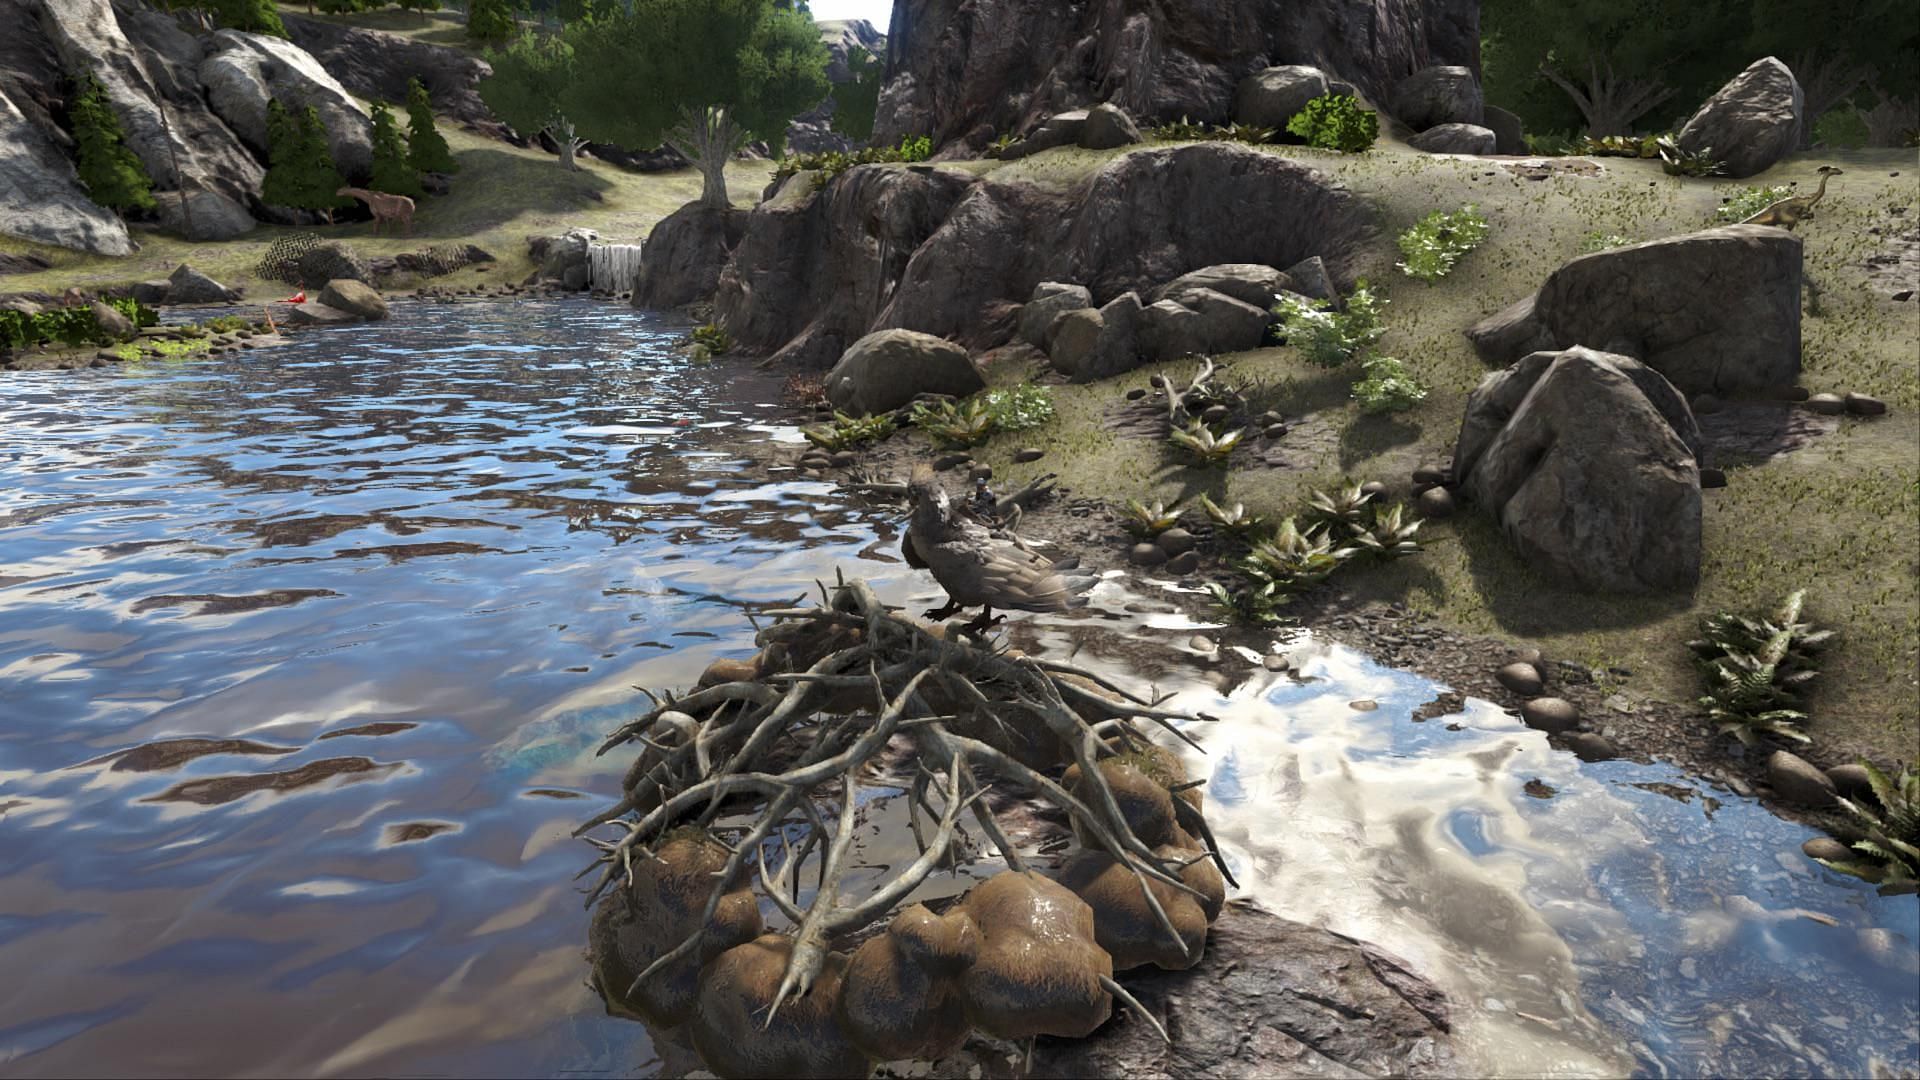 Casteroides build beaver dams out in the wild in Ark Survival Ascended (Image via Studio Wildcard)